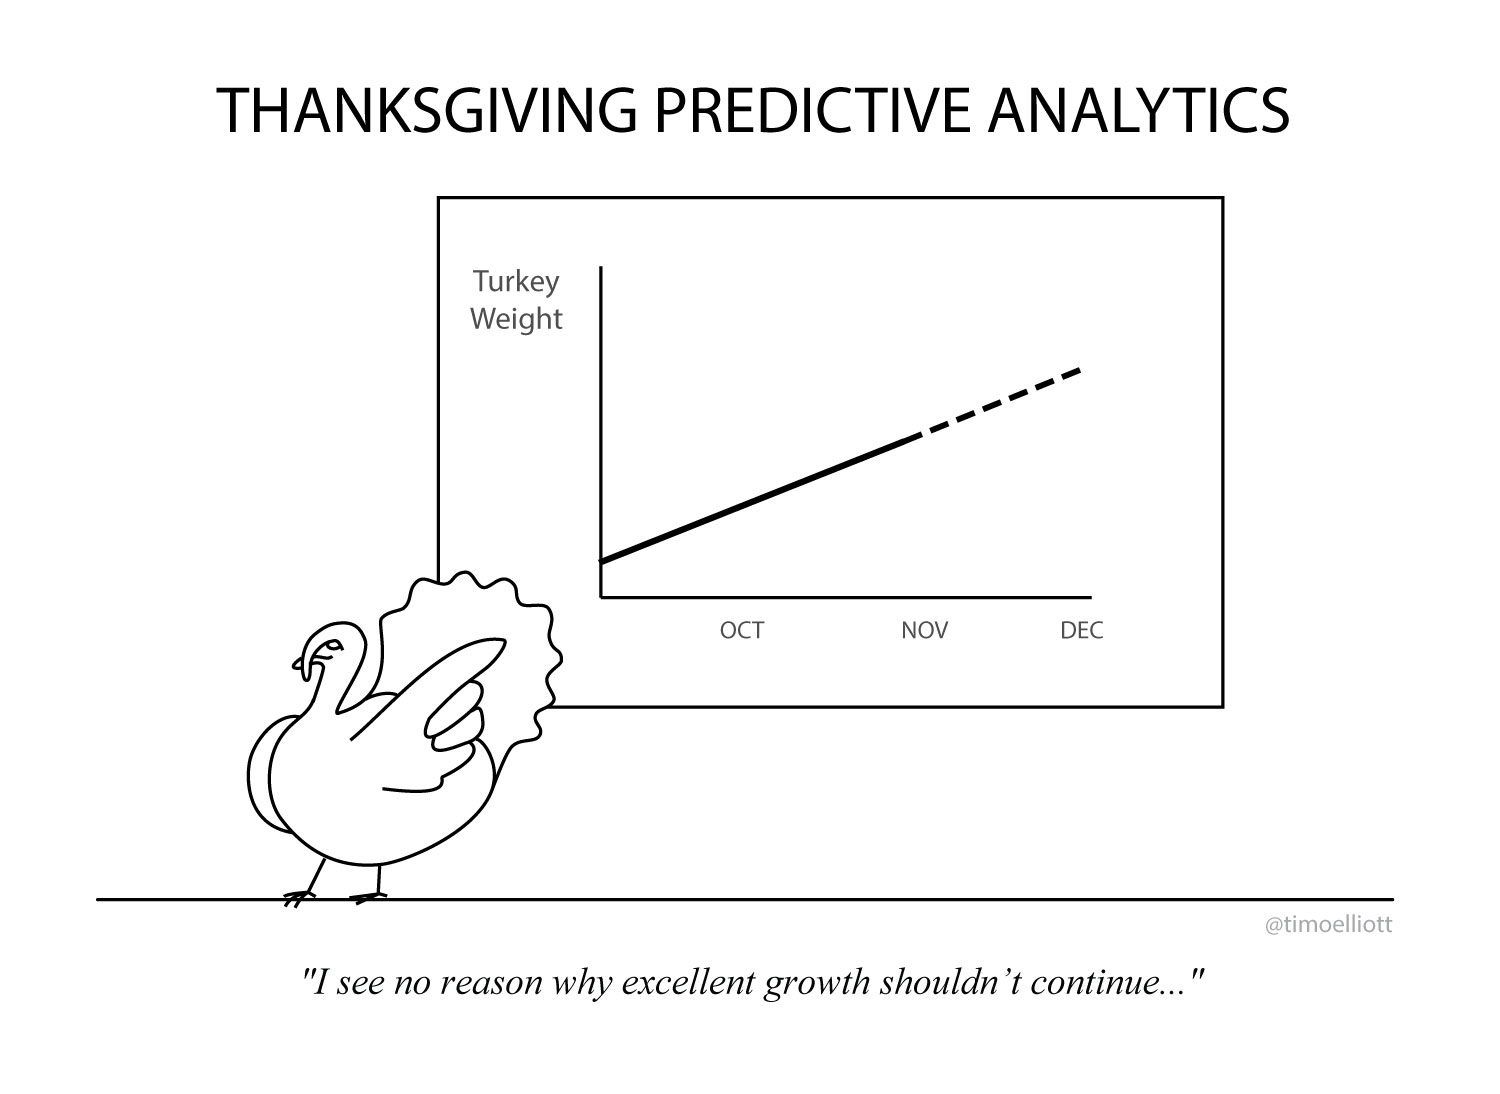 A cartoon of a turkey predicting future growth on the eve of Thanksgiving